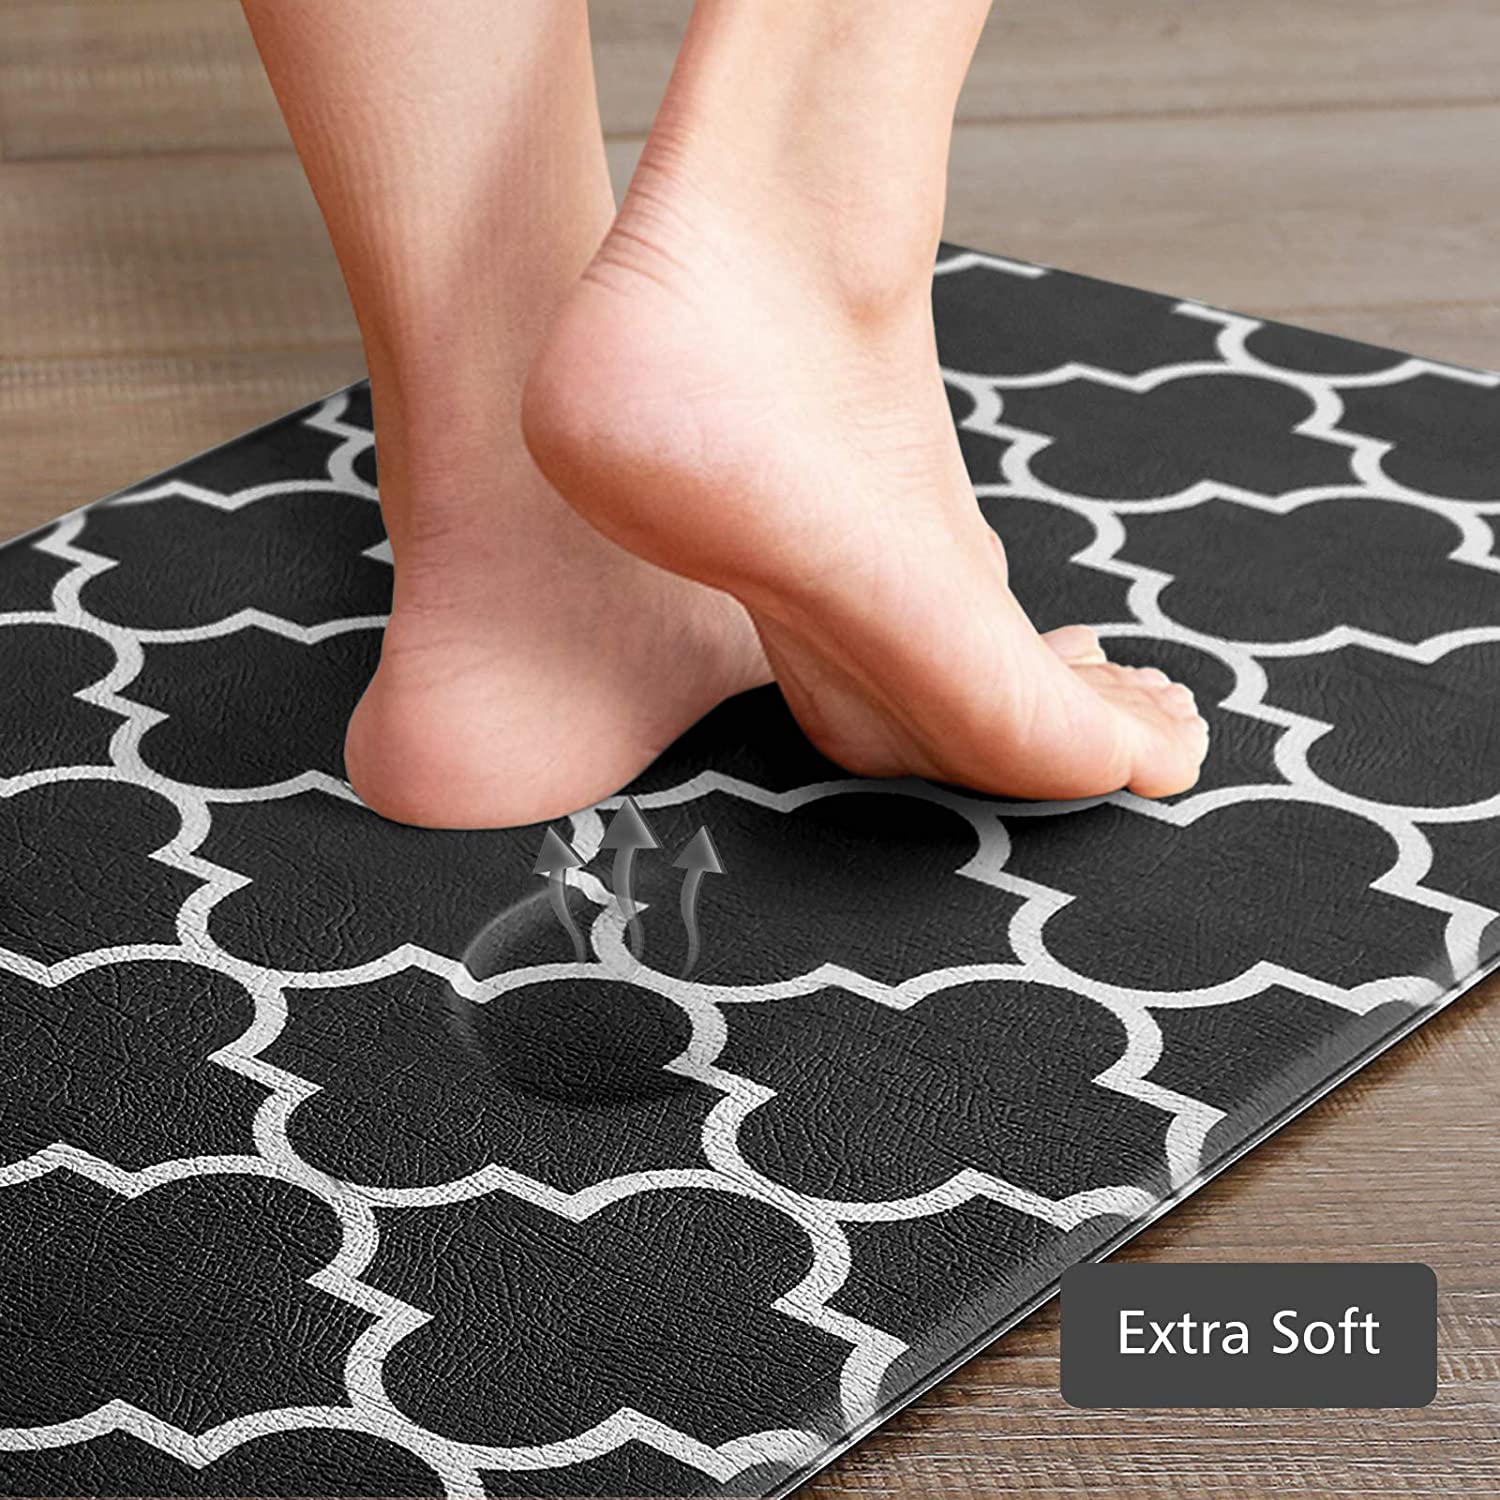 2 Pieces Thick Cushioned Kitchen Floor Mats Set Heavy Duty - Cooking,  Trellis